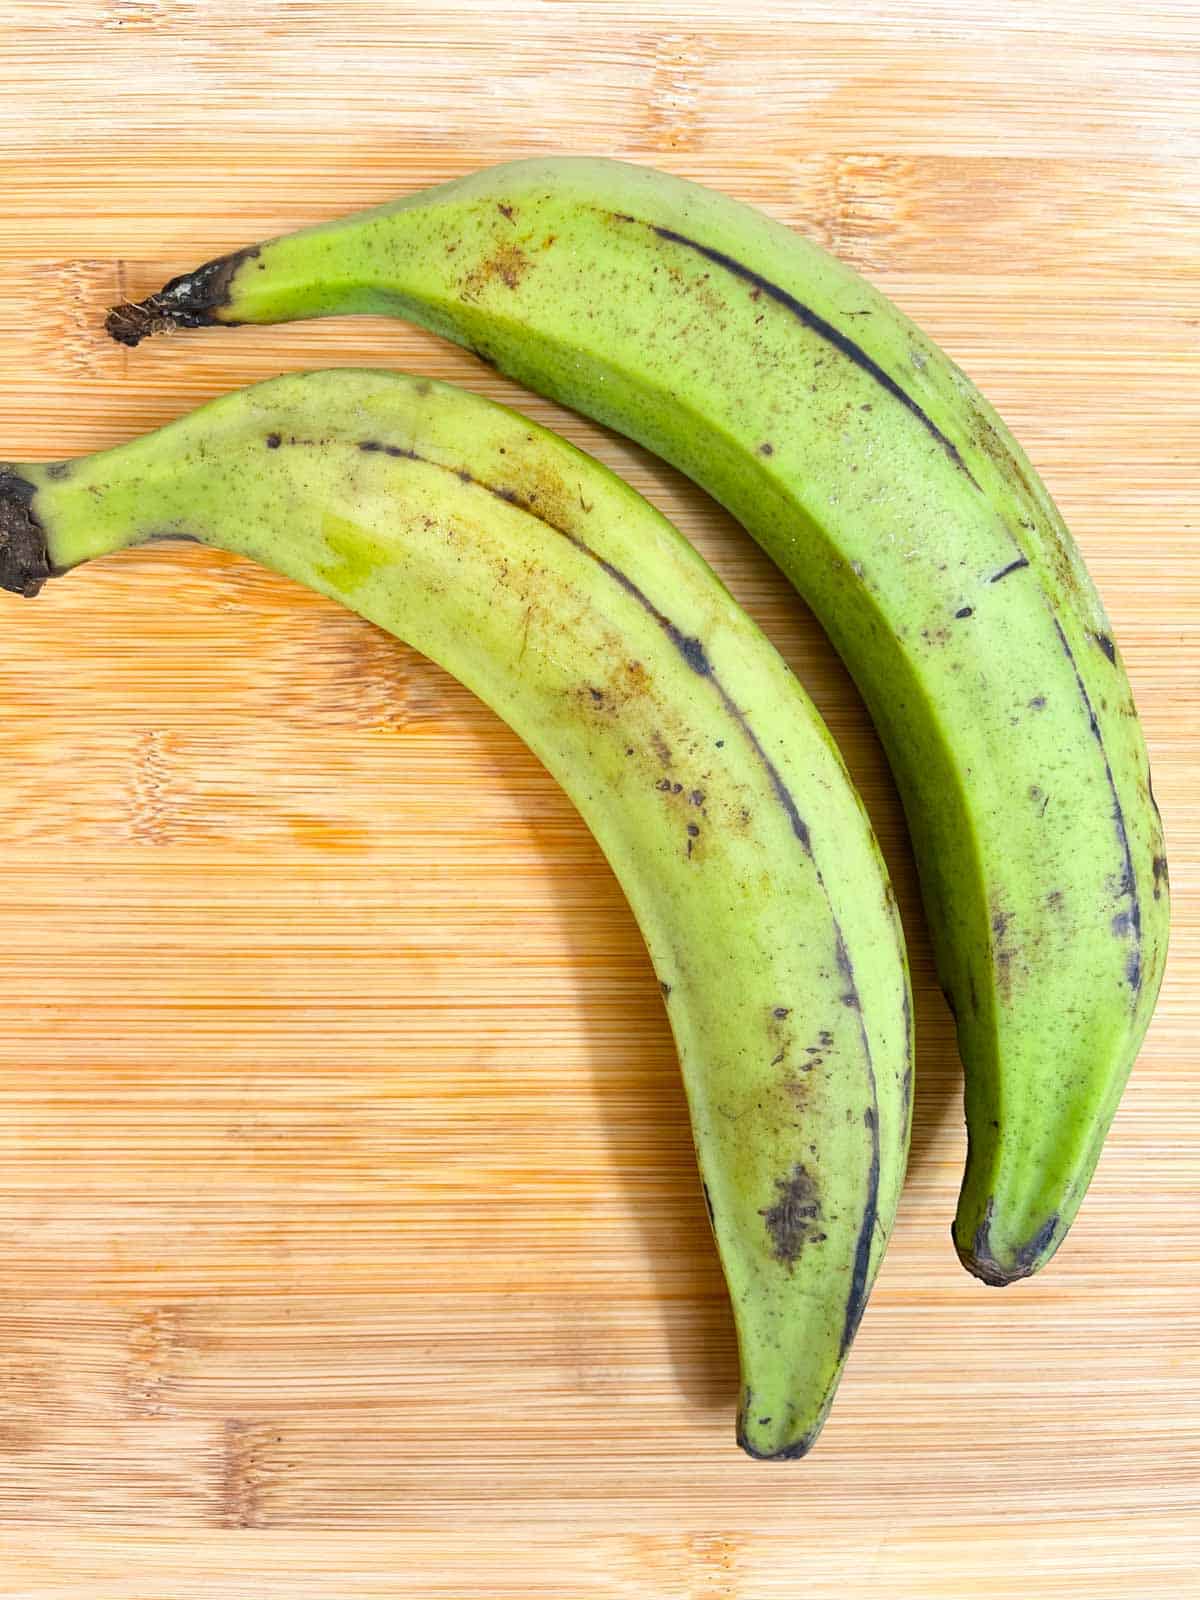 two plantains on the wooden board